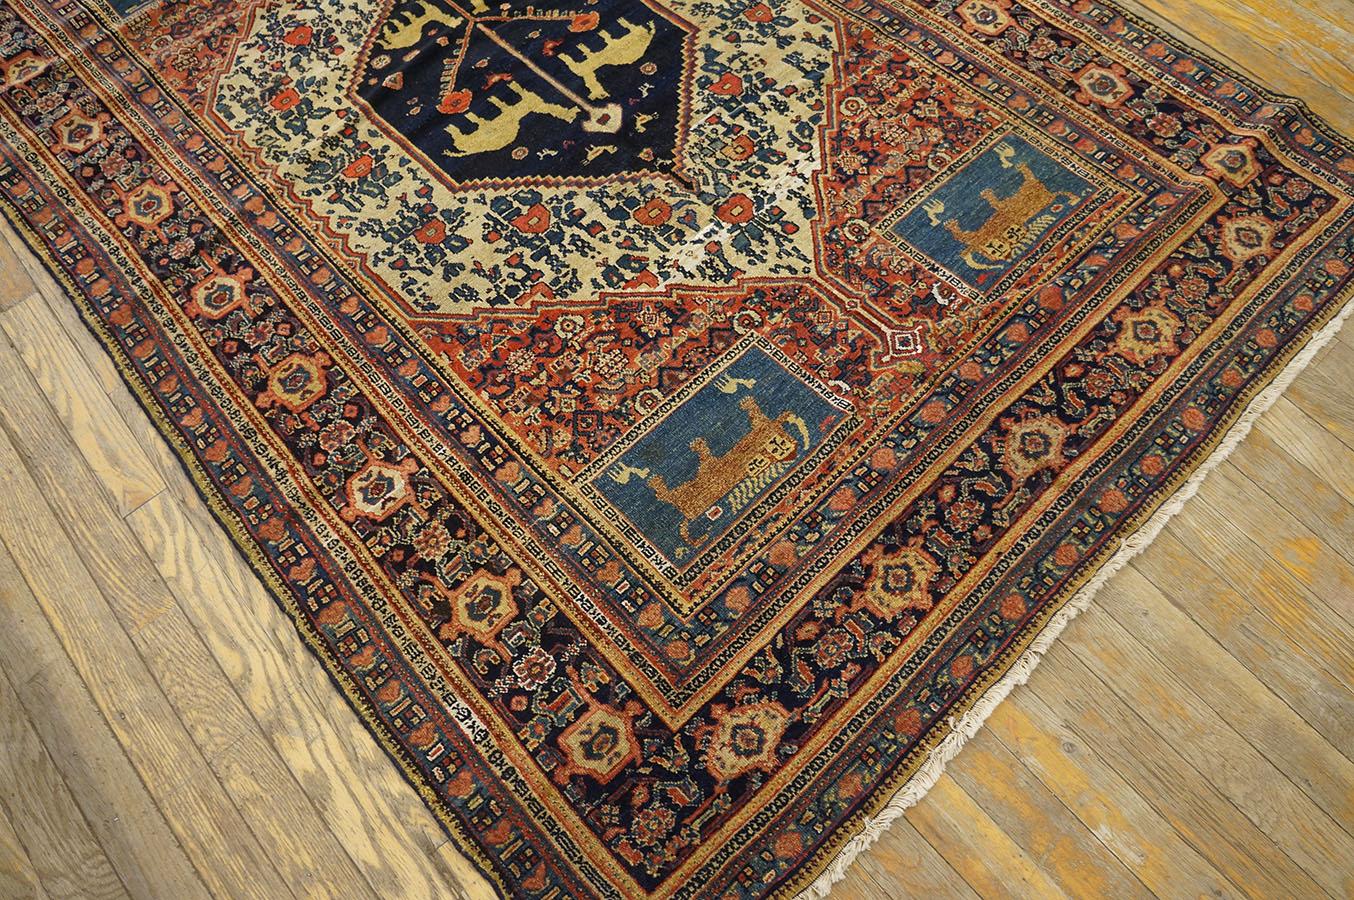  19th Century W. Persian Senneh Carpet ( 4'8'' x 6'6'' - 142 x 198 ) In Good Condition For Sale In New York, NY